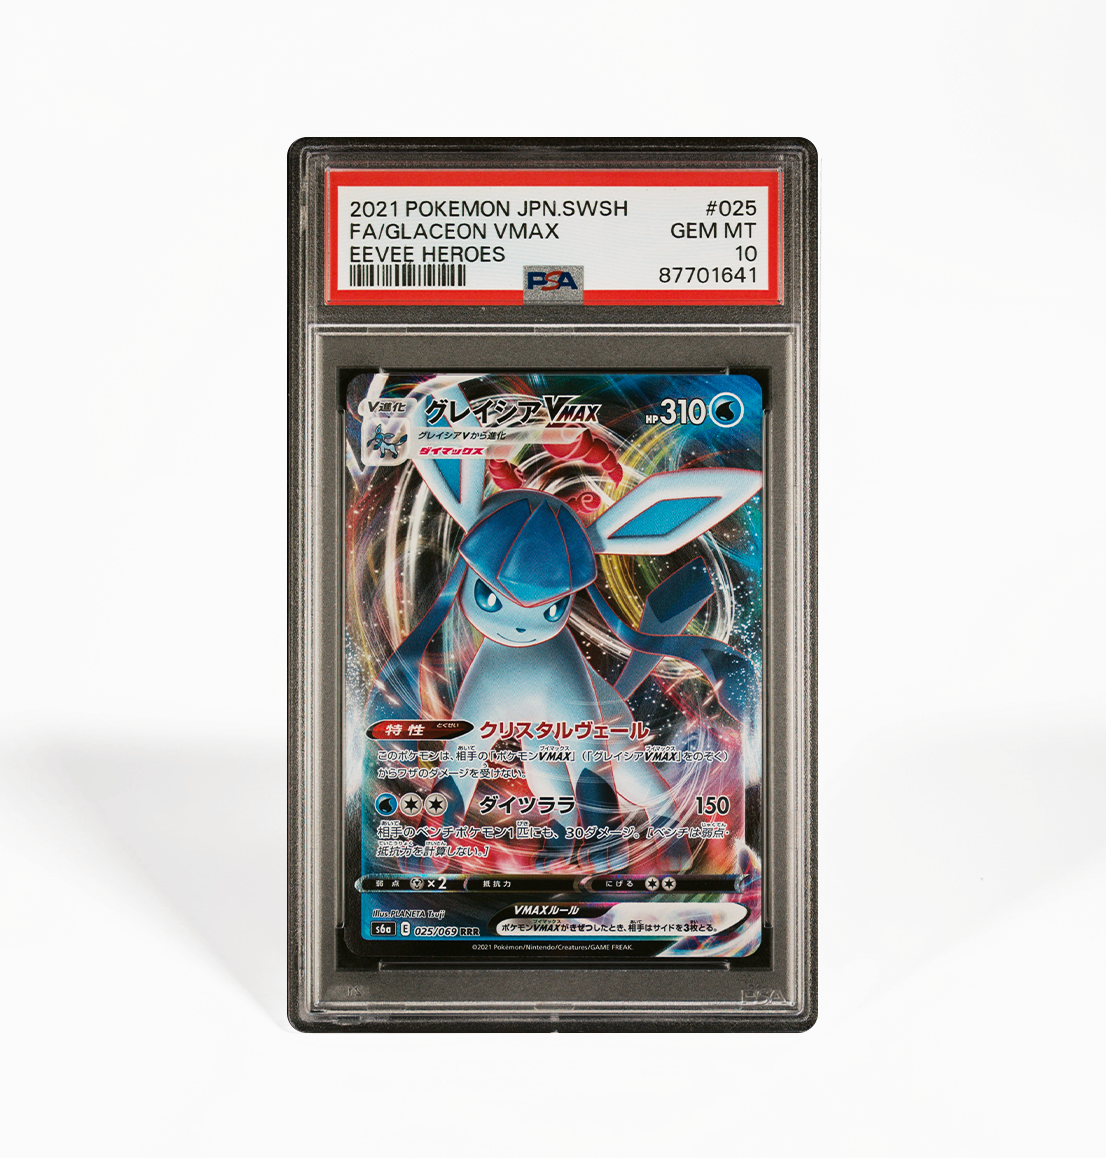 PSA 10 Glaceon VMax #025 s6a Eevee Heroes Japanese Pokemon card